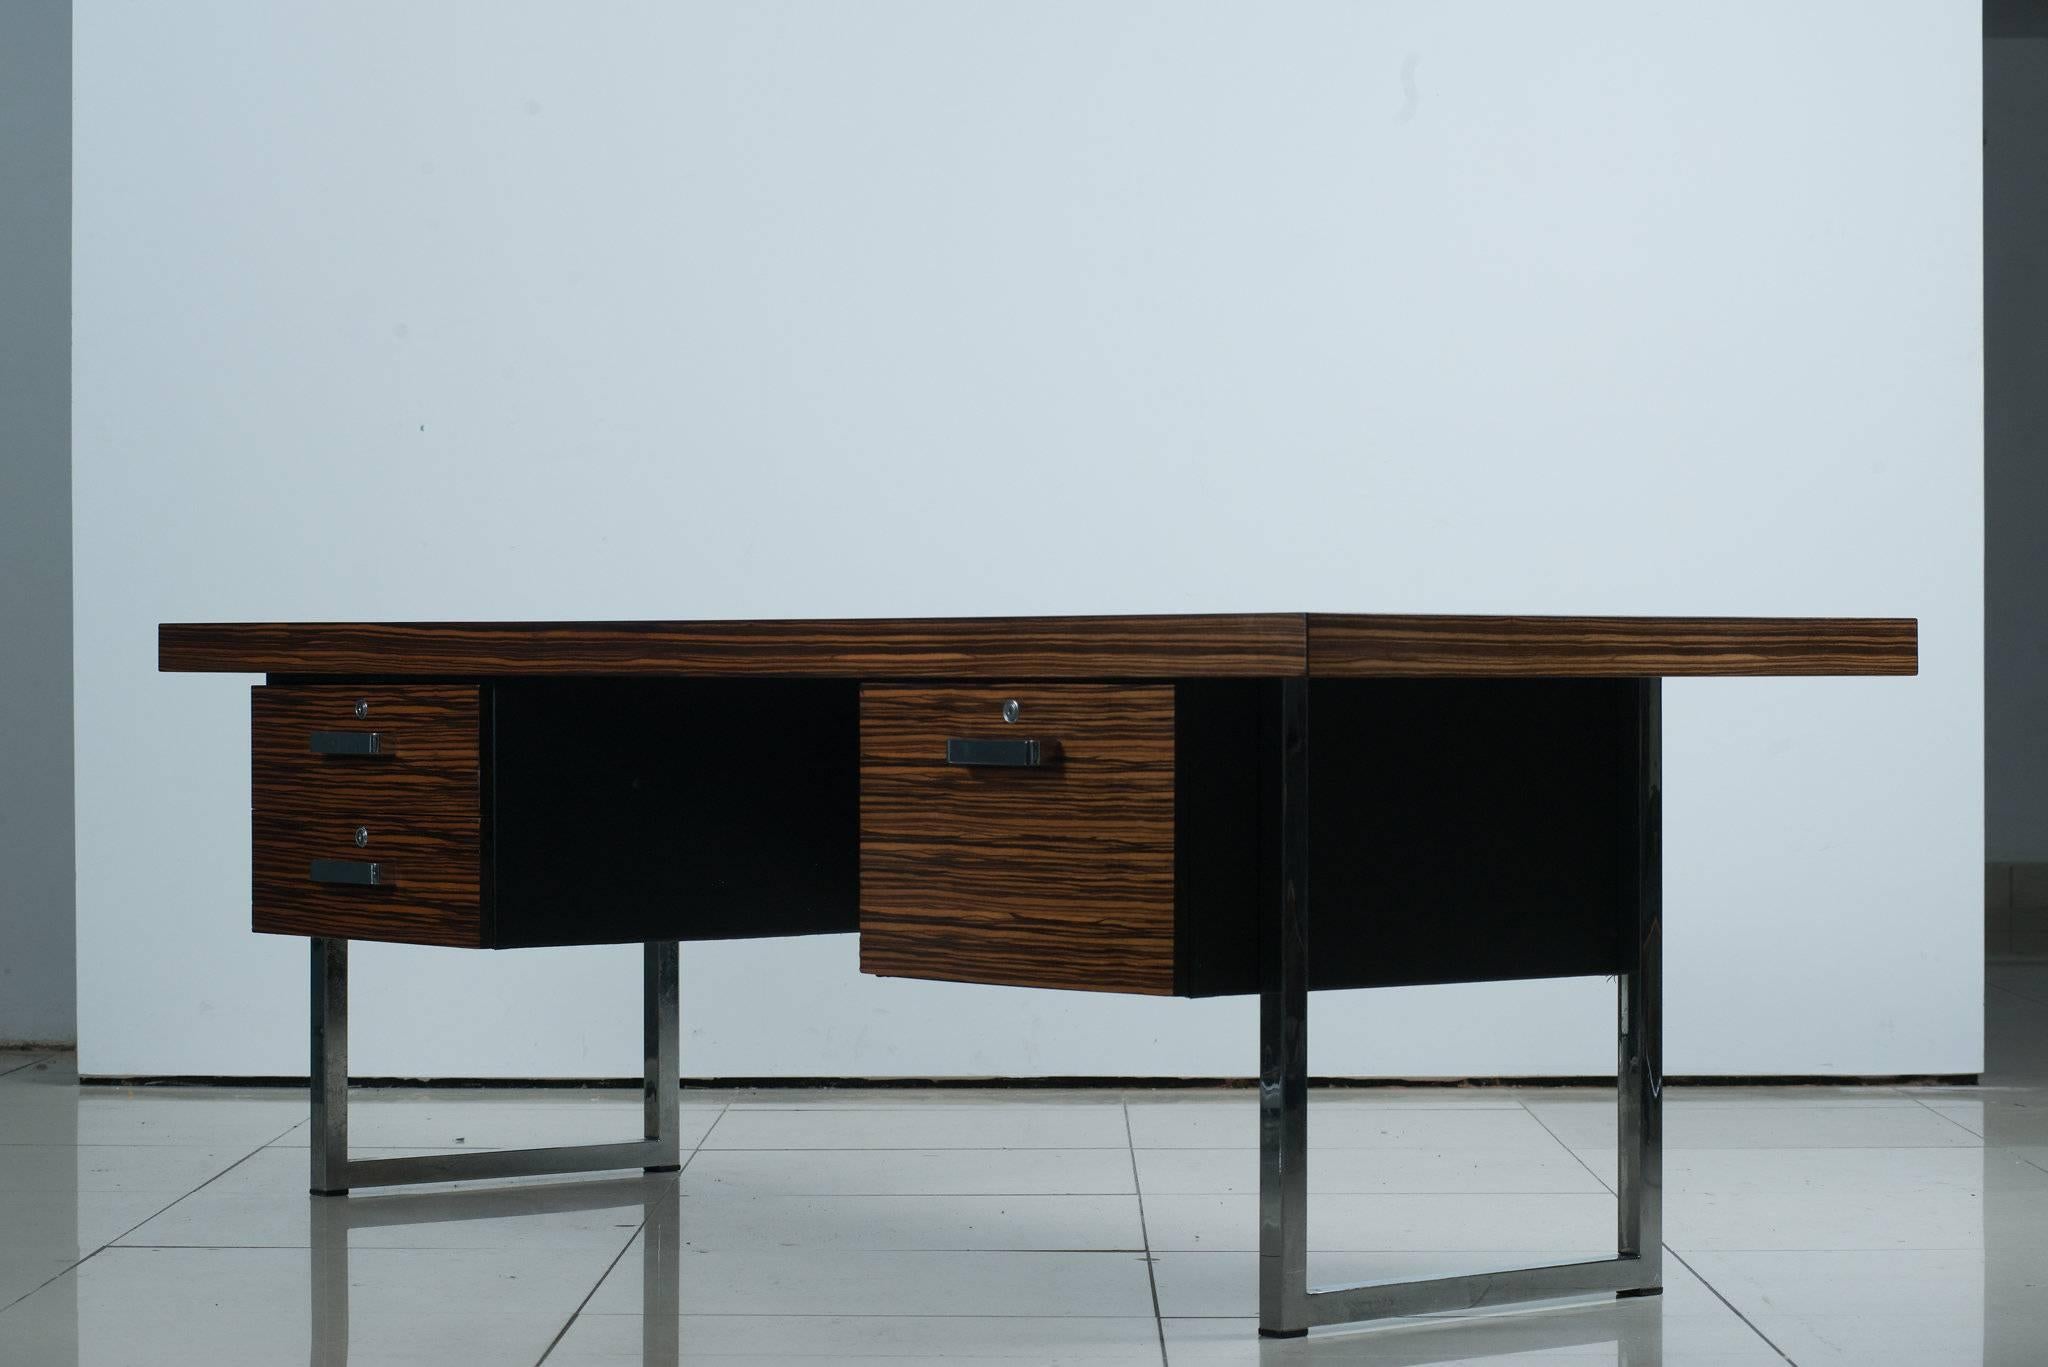 1960s rosewood executive desk by Gordon Russell Ltd. A richly appointed 1960s power desk executed in extraordinarily grained Brazilian rosewood and chrome. Solid construction and timeless lines.

Ships from London. Available to EU customers only.